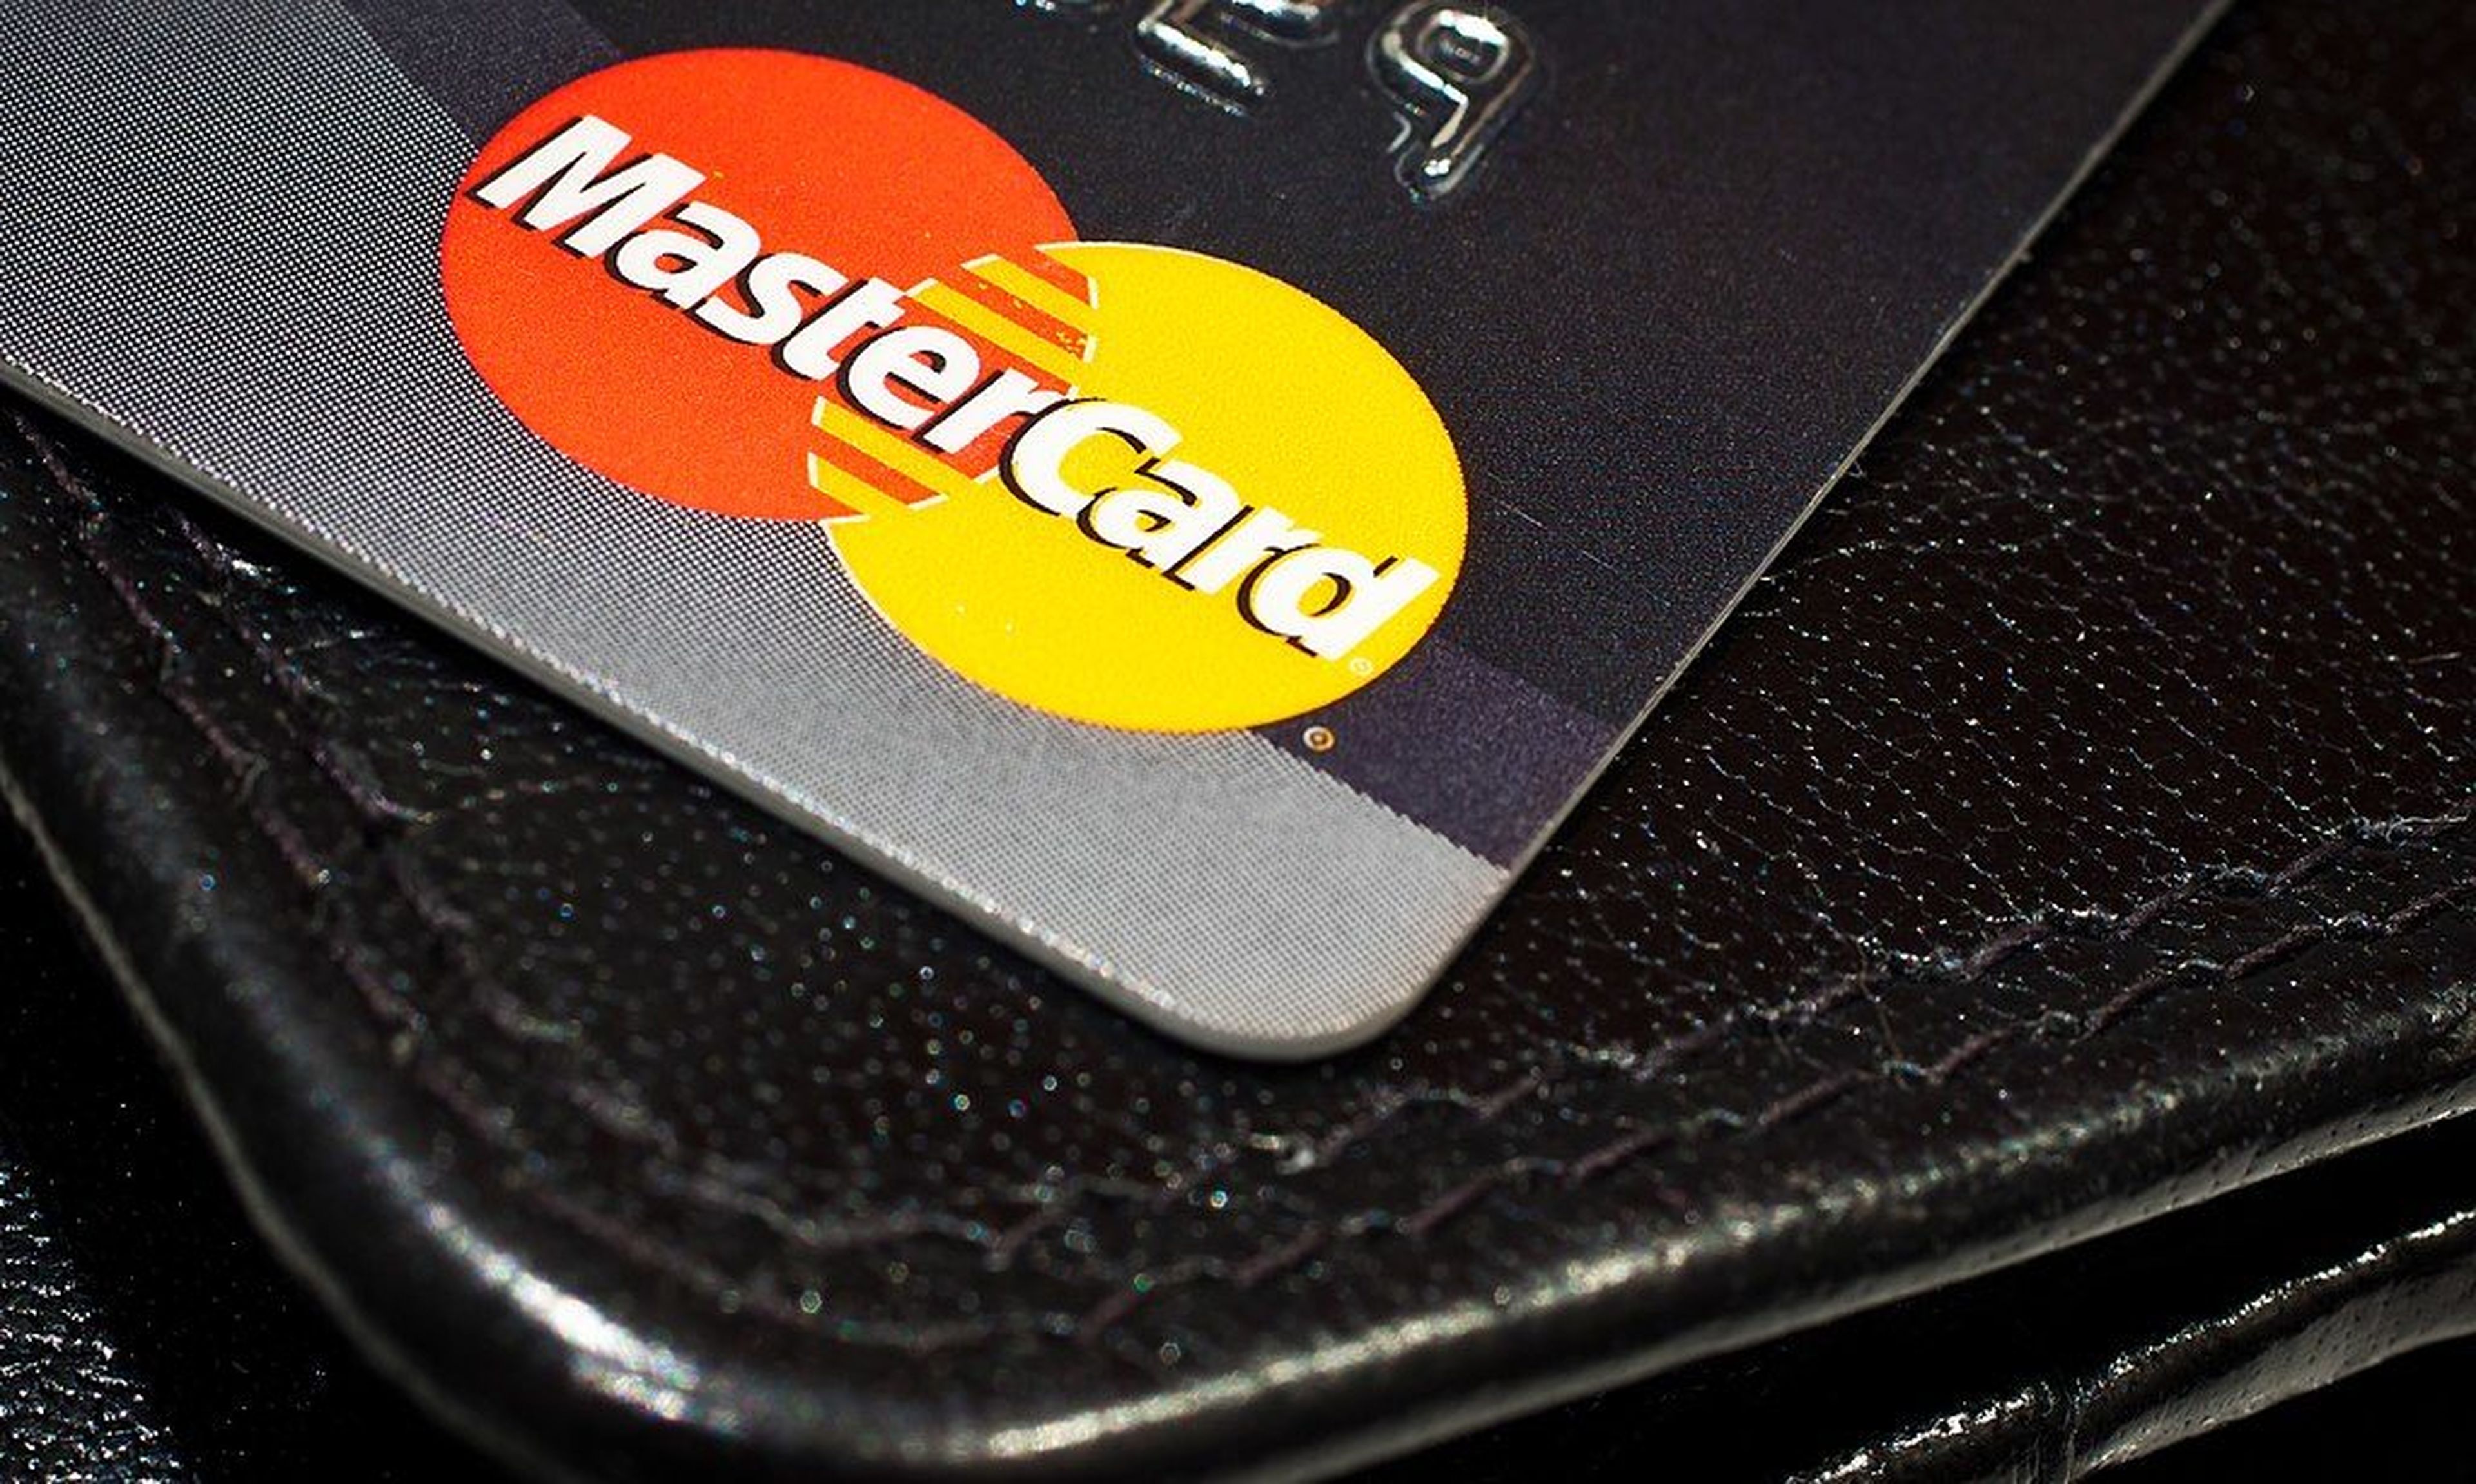 (&#8220;MasterCard credit card&#8221; by Håkan Dahlström is licensed under CC BY 2.0.)